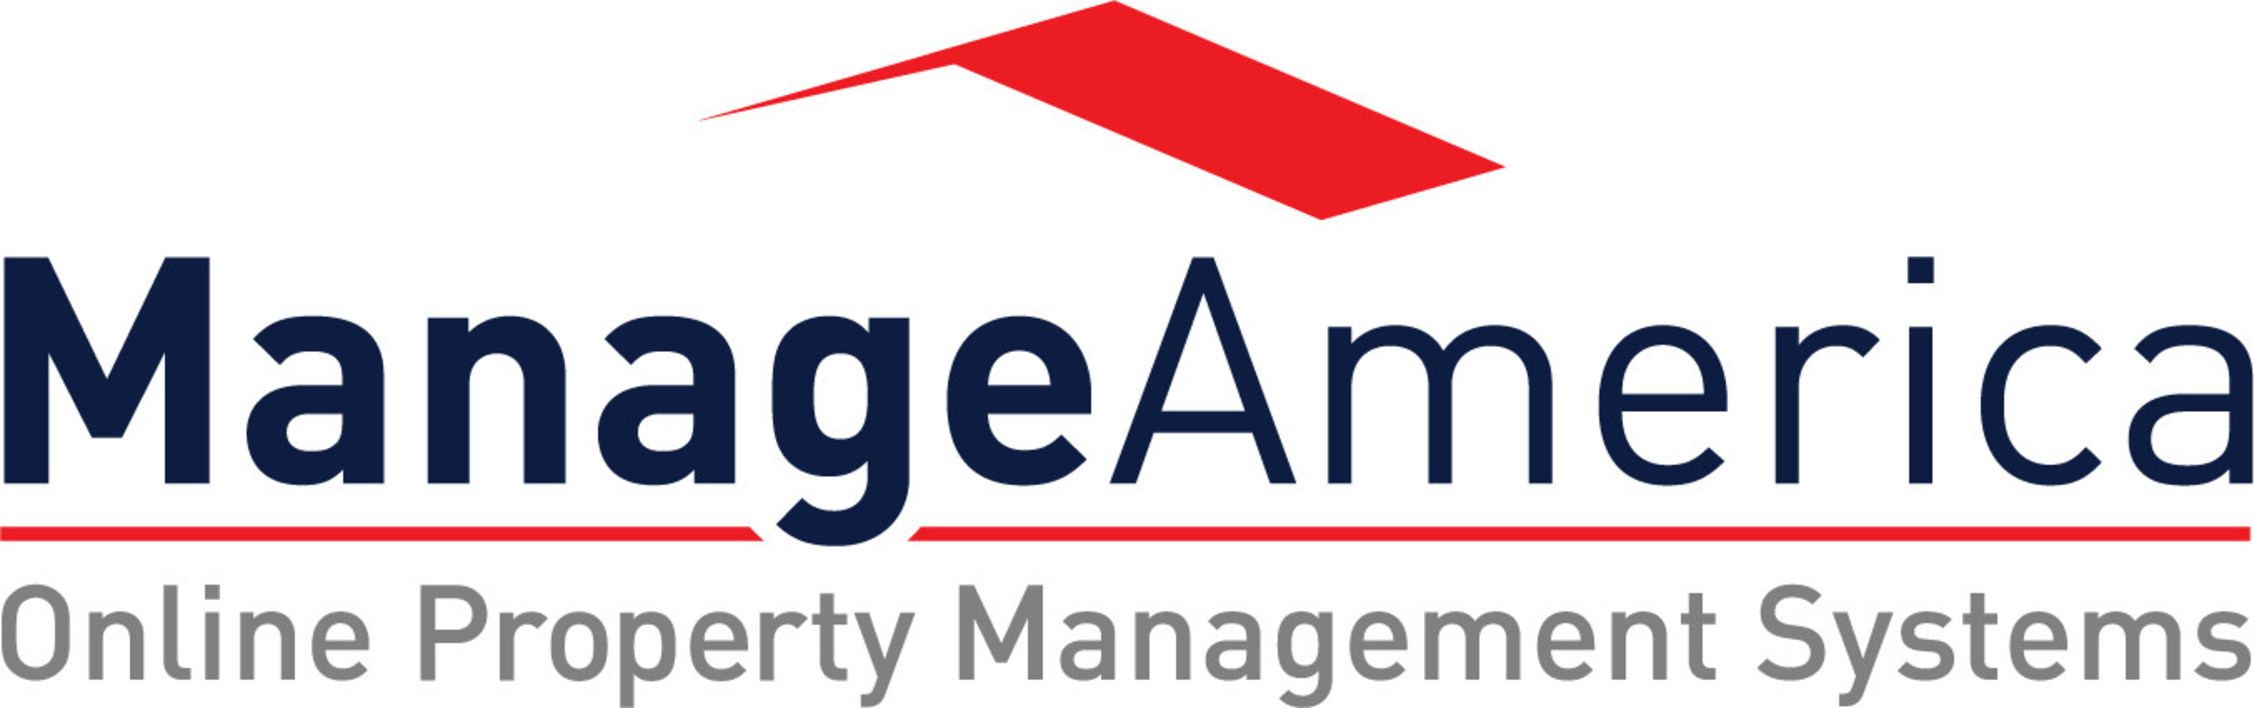 ManageAmerica Names Chris Schwarze as its Director of Sales ...